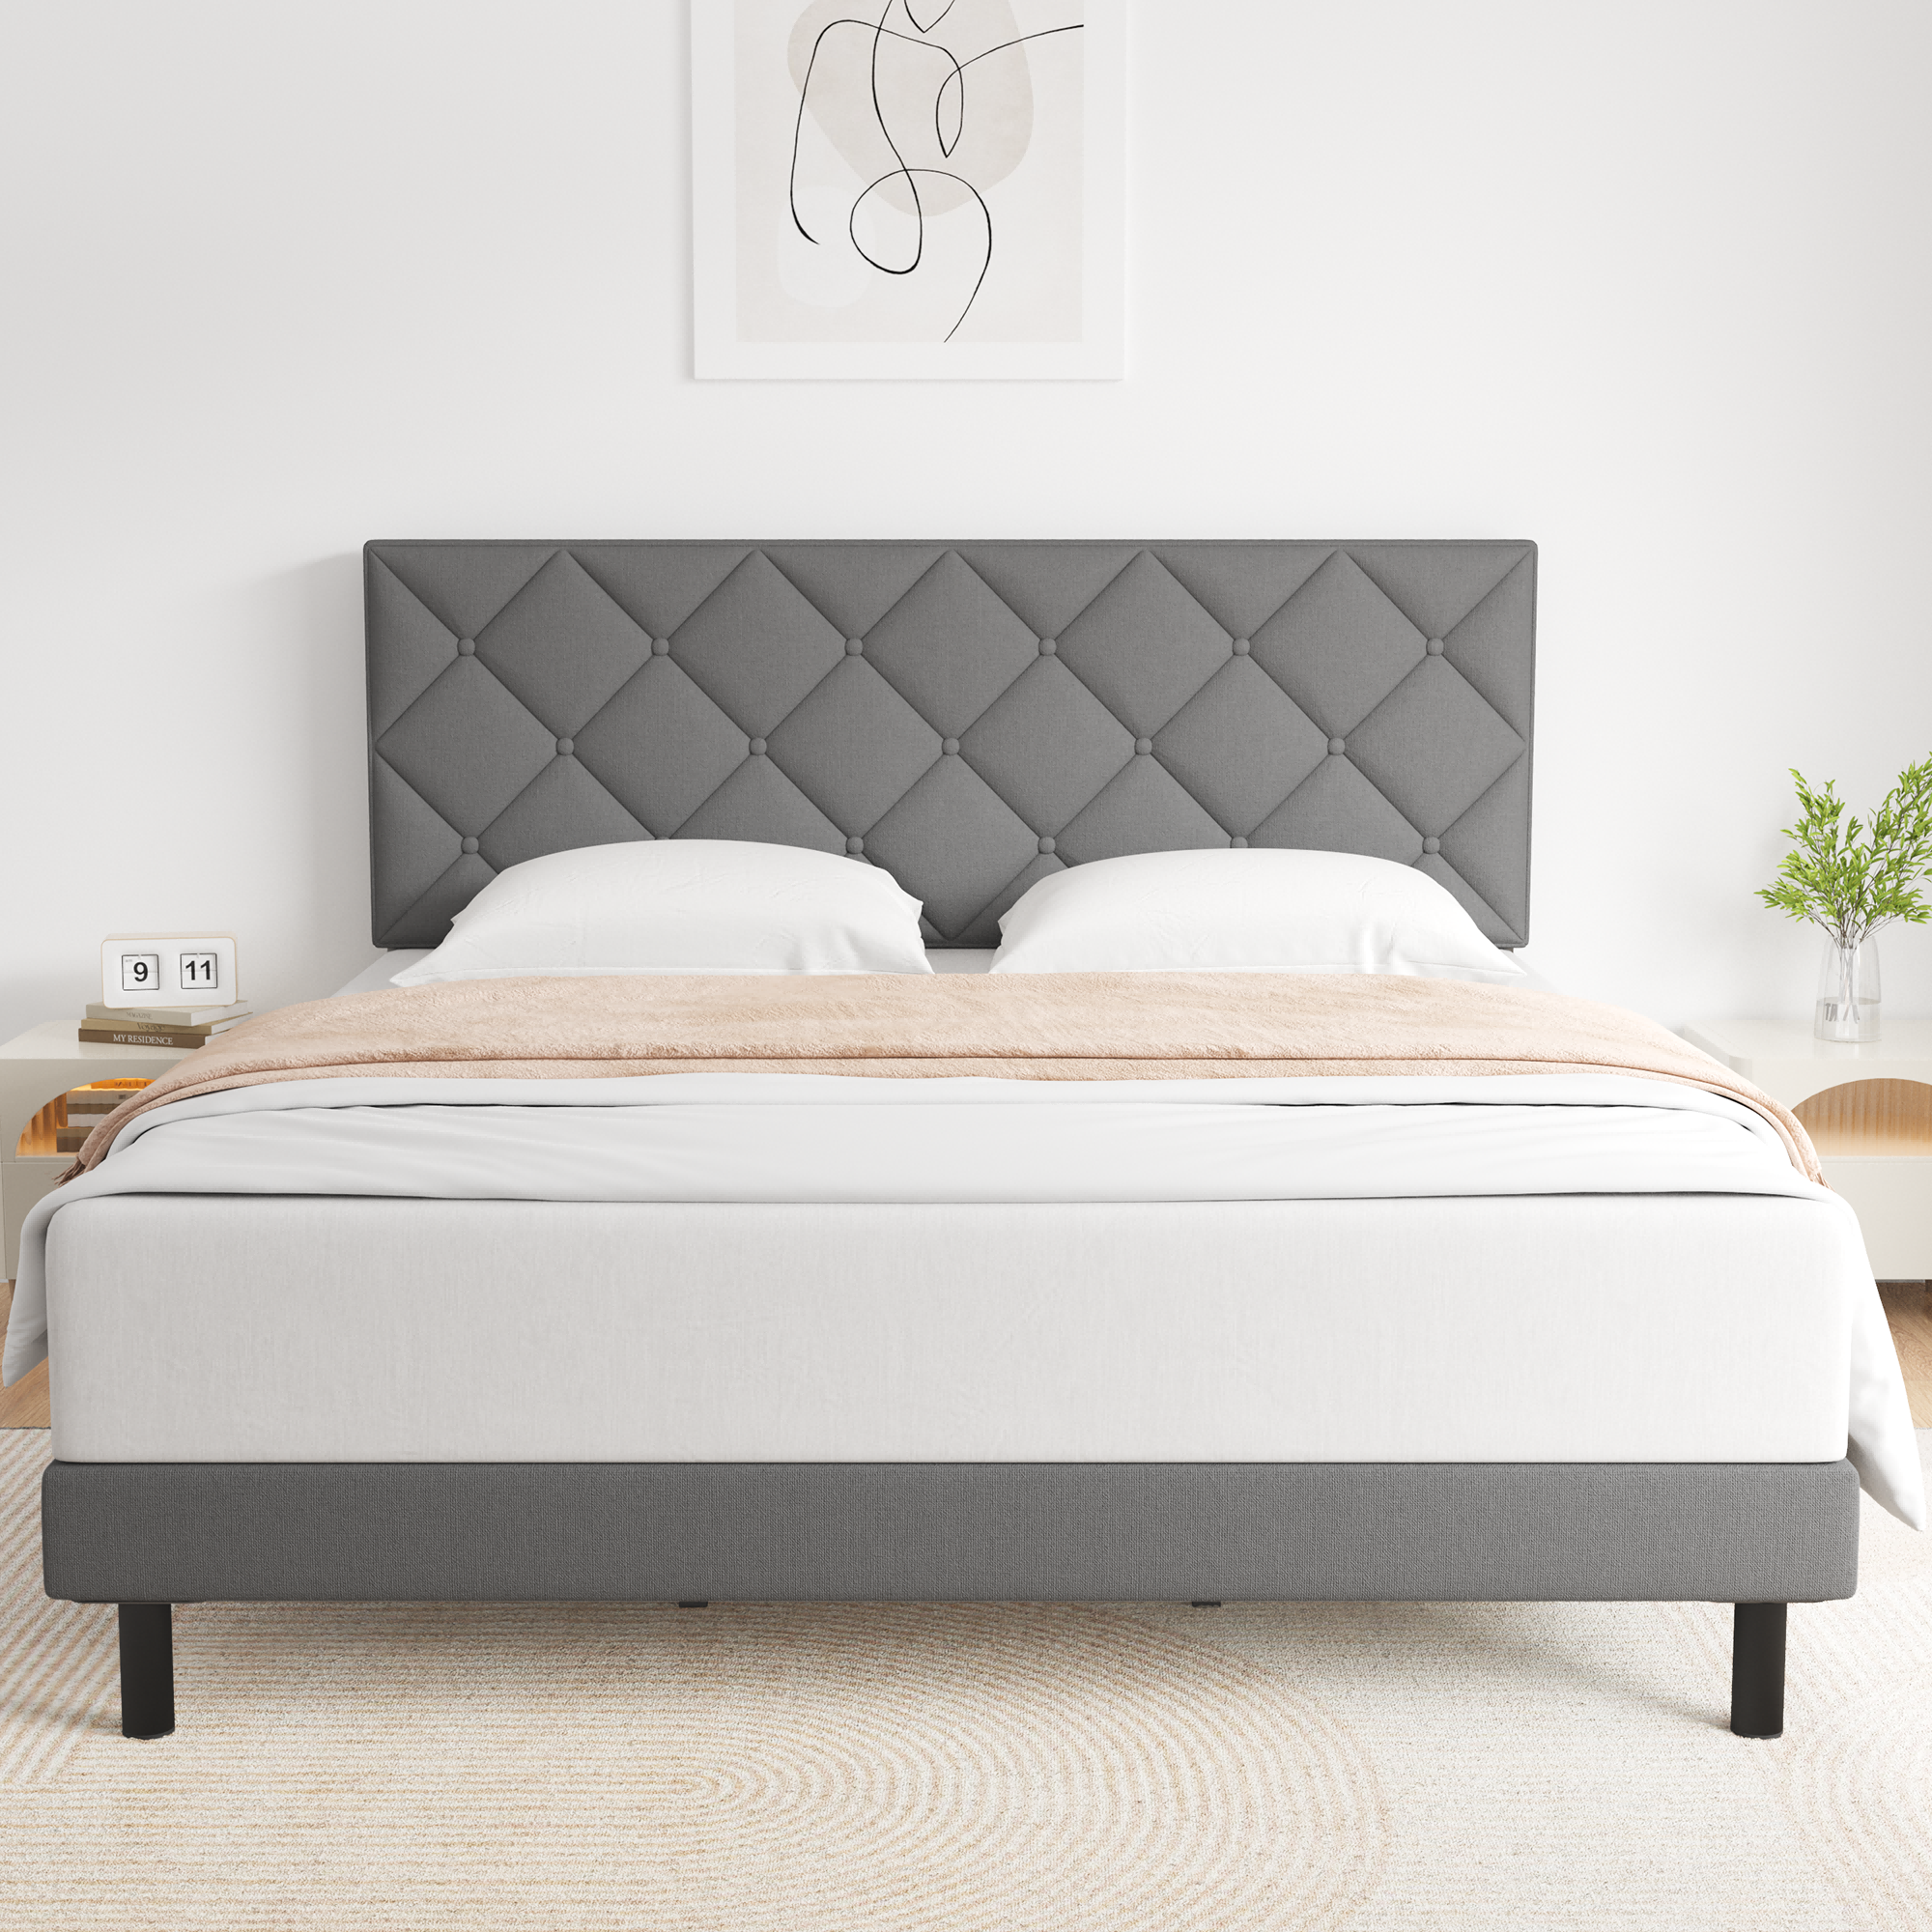 King Bed Frame, HAIIDE King Size bed Frame with Fabric Upholstered Headboard,light Grey, Easy Assembly - image 1 of 7